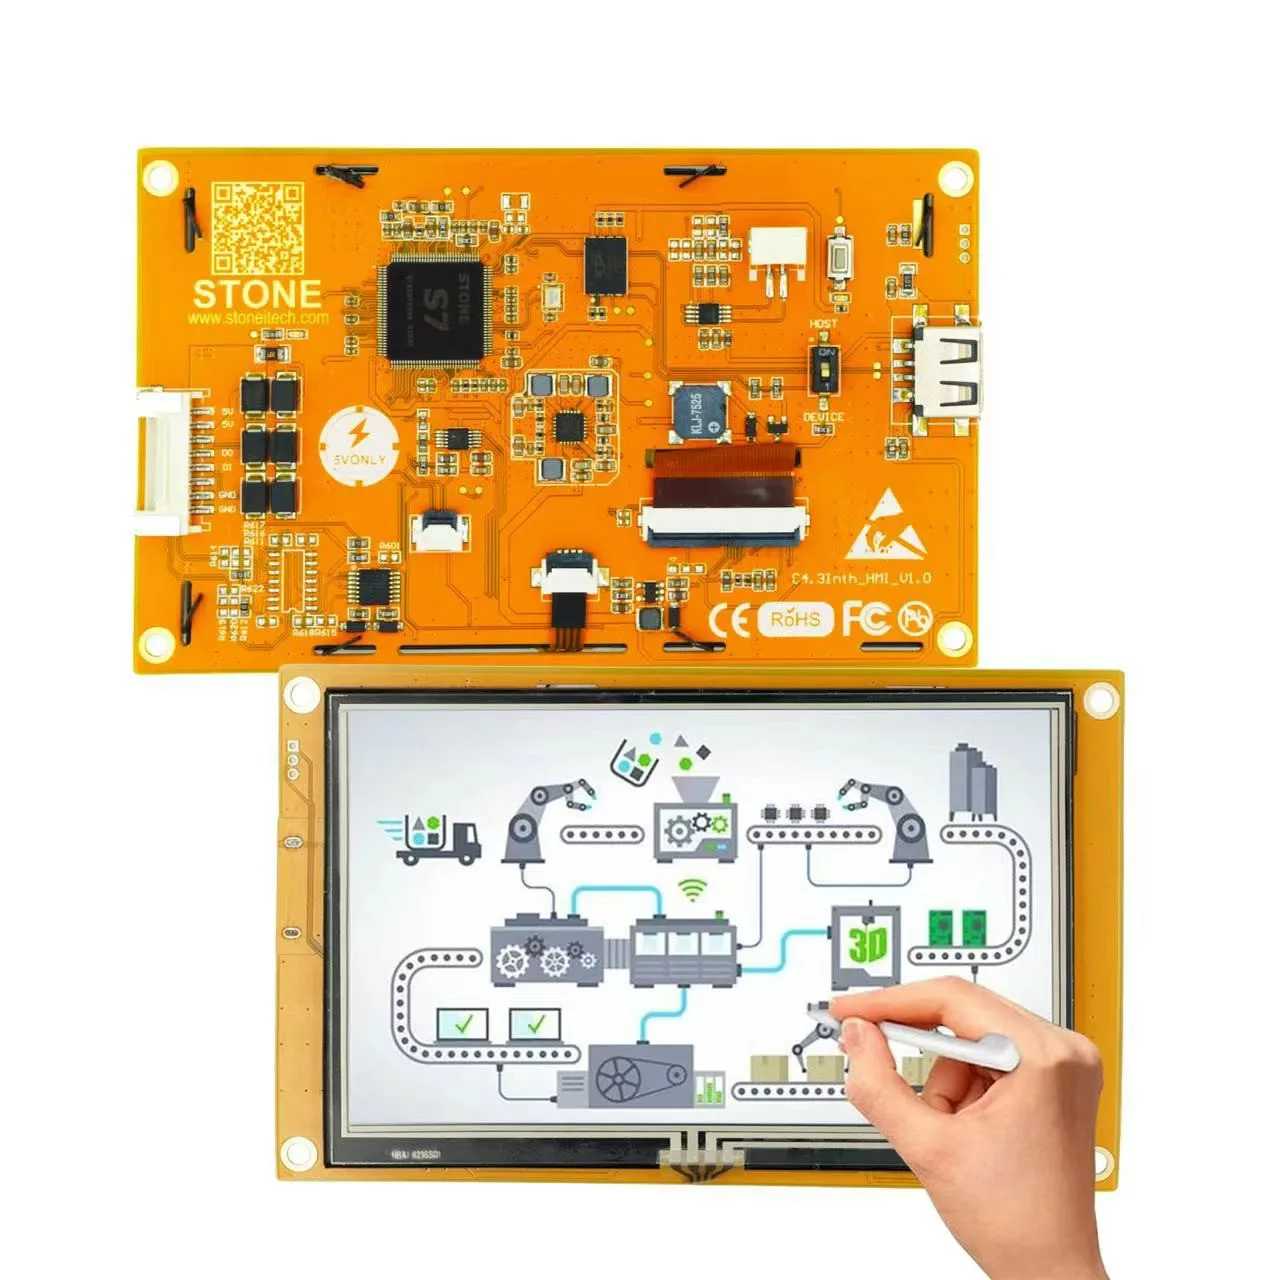 SCBRHMI 4.3 Inch Full Color LCD Display HMI Resistive Touch Screen Built-In RTC With RS232 Port for Arduino